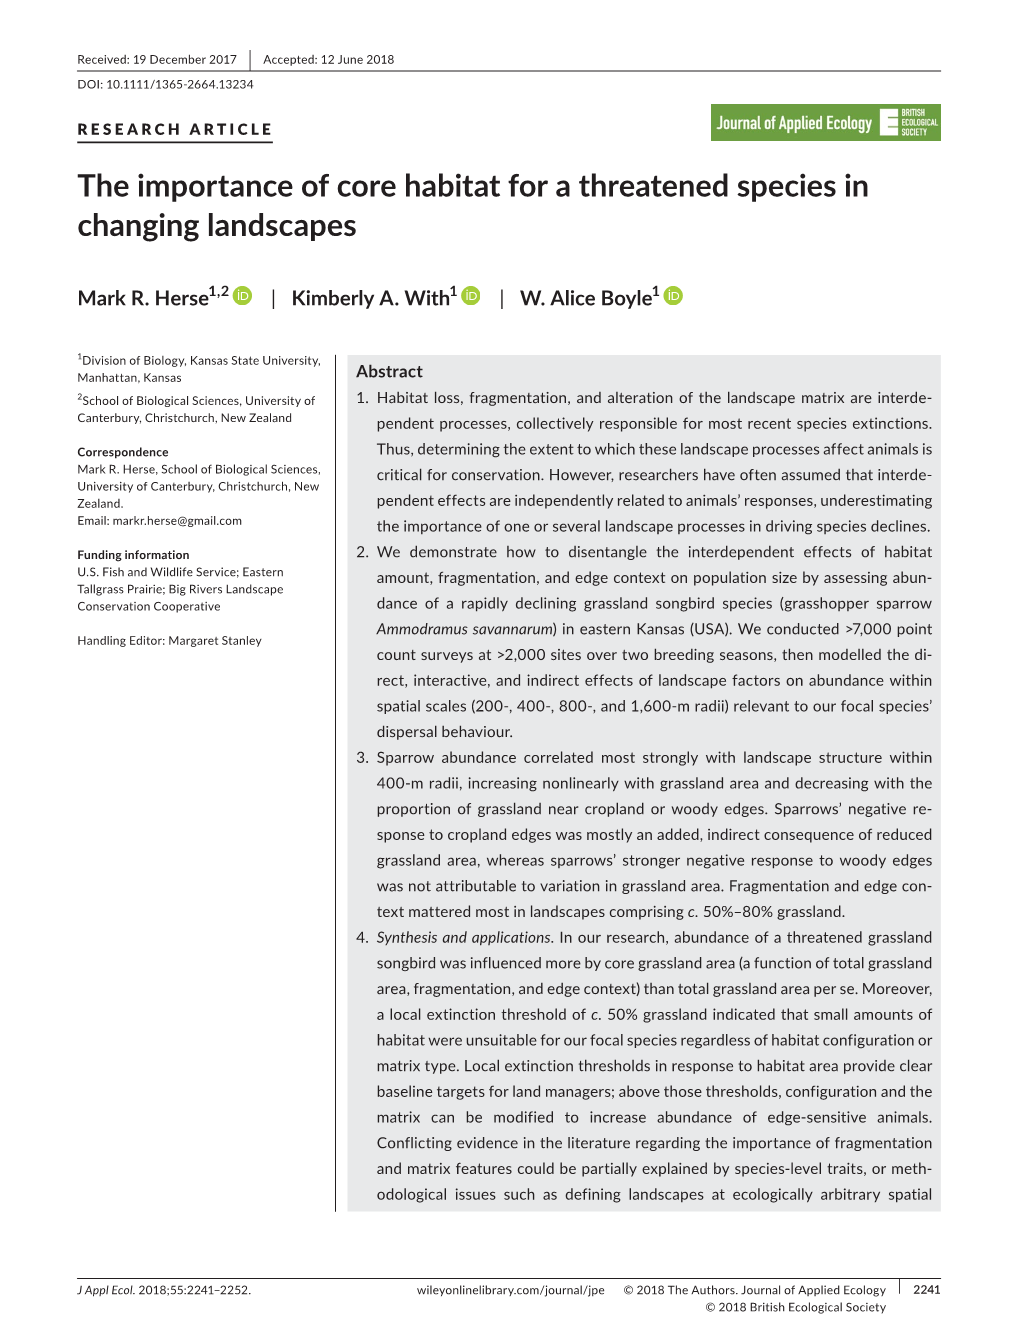 The Importance of Core Habitat for a Threatened Species in Changing Landscapes